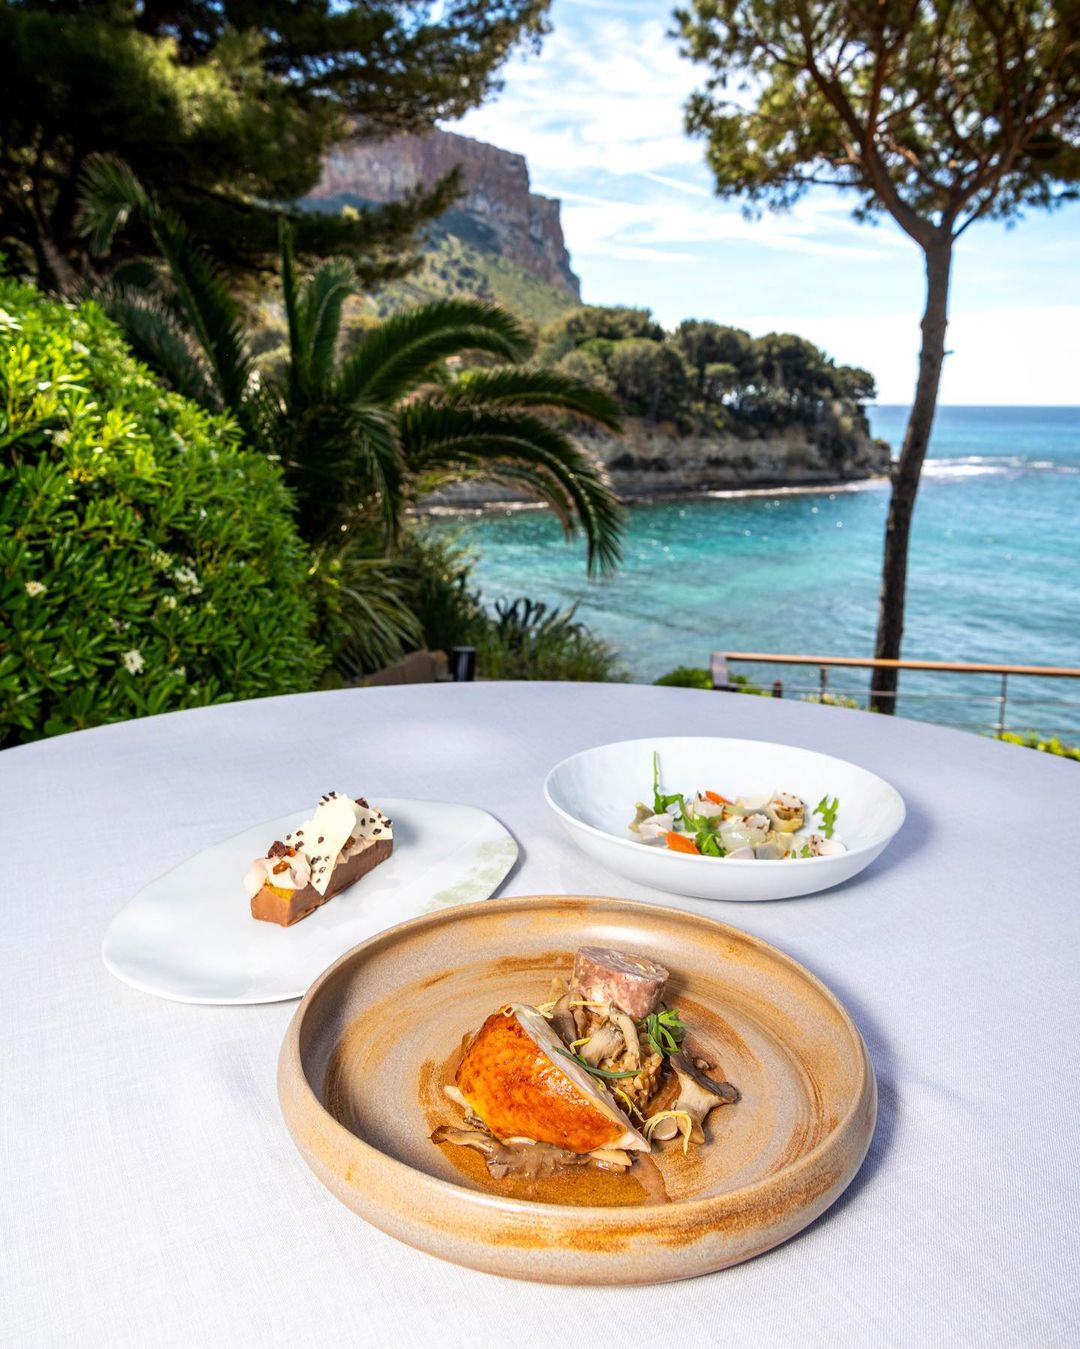 At La Villa Madie, Chef Dimitri Droisneau creates his menus with passion and in complete harmony with the environment